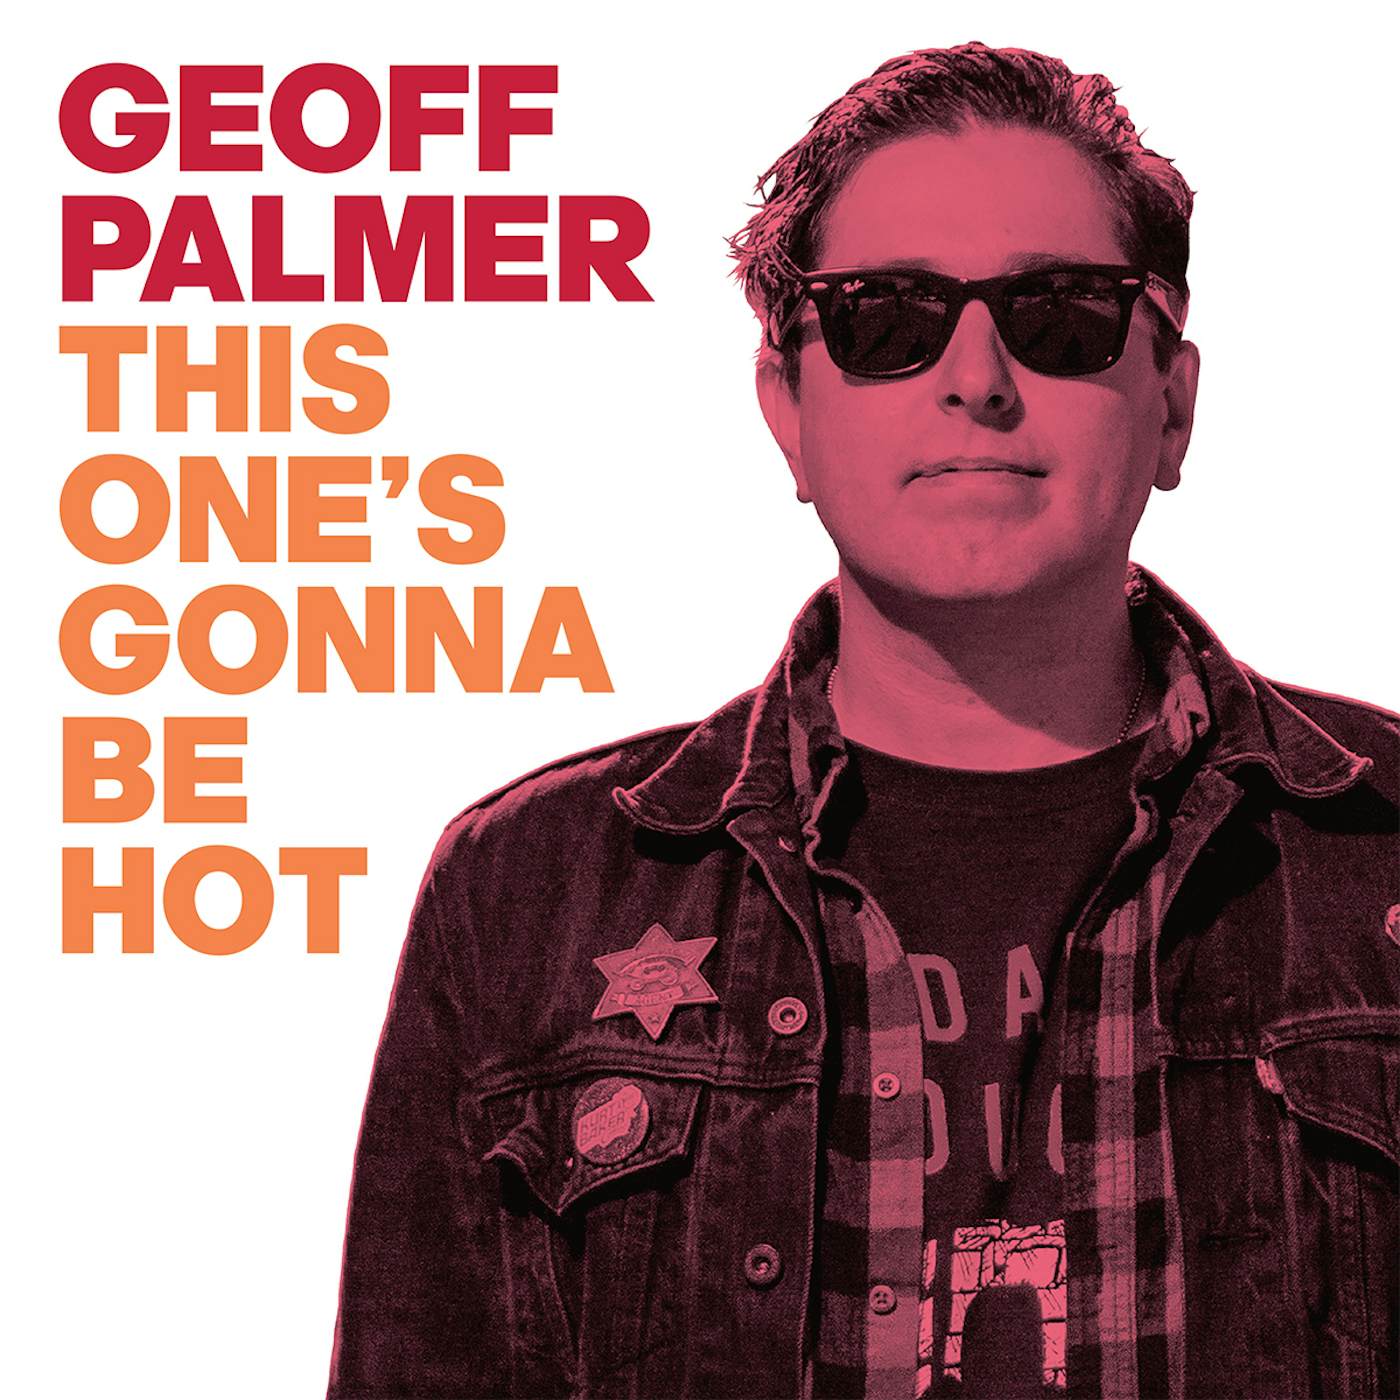 Geoff Palmer This One's Gonna Be Hot Vinyl Record